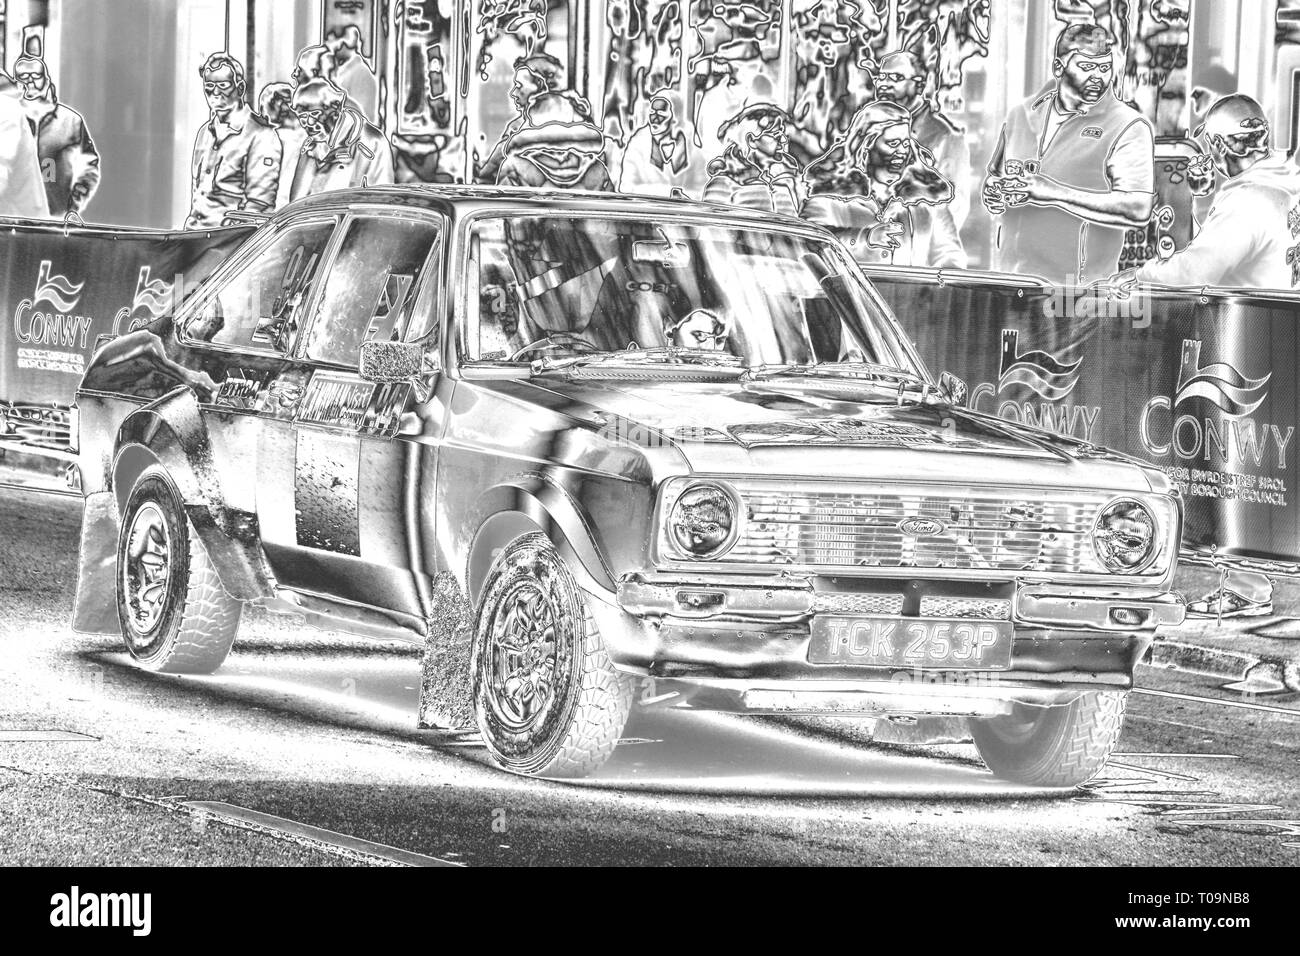 The Cambrian Rally in Llandudno, The images have a chrome effect which gives the image a metallic look Stock Photo